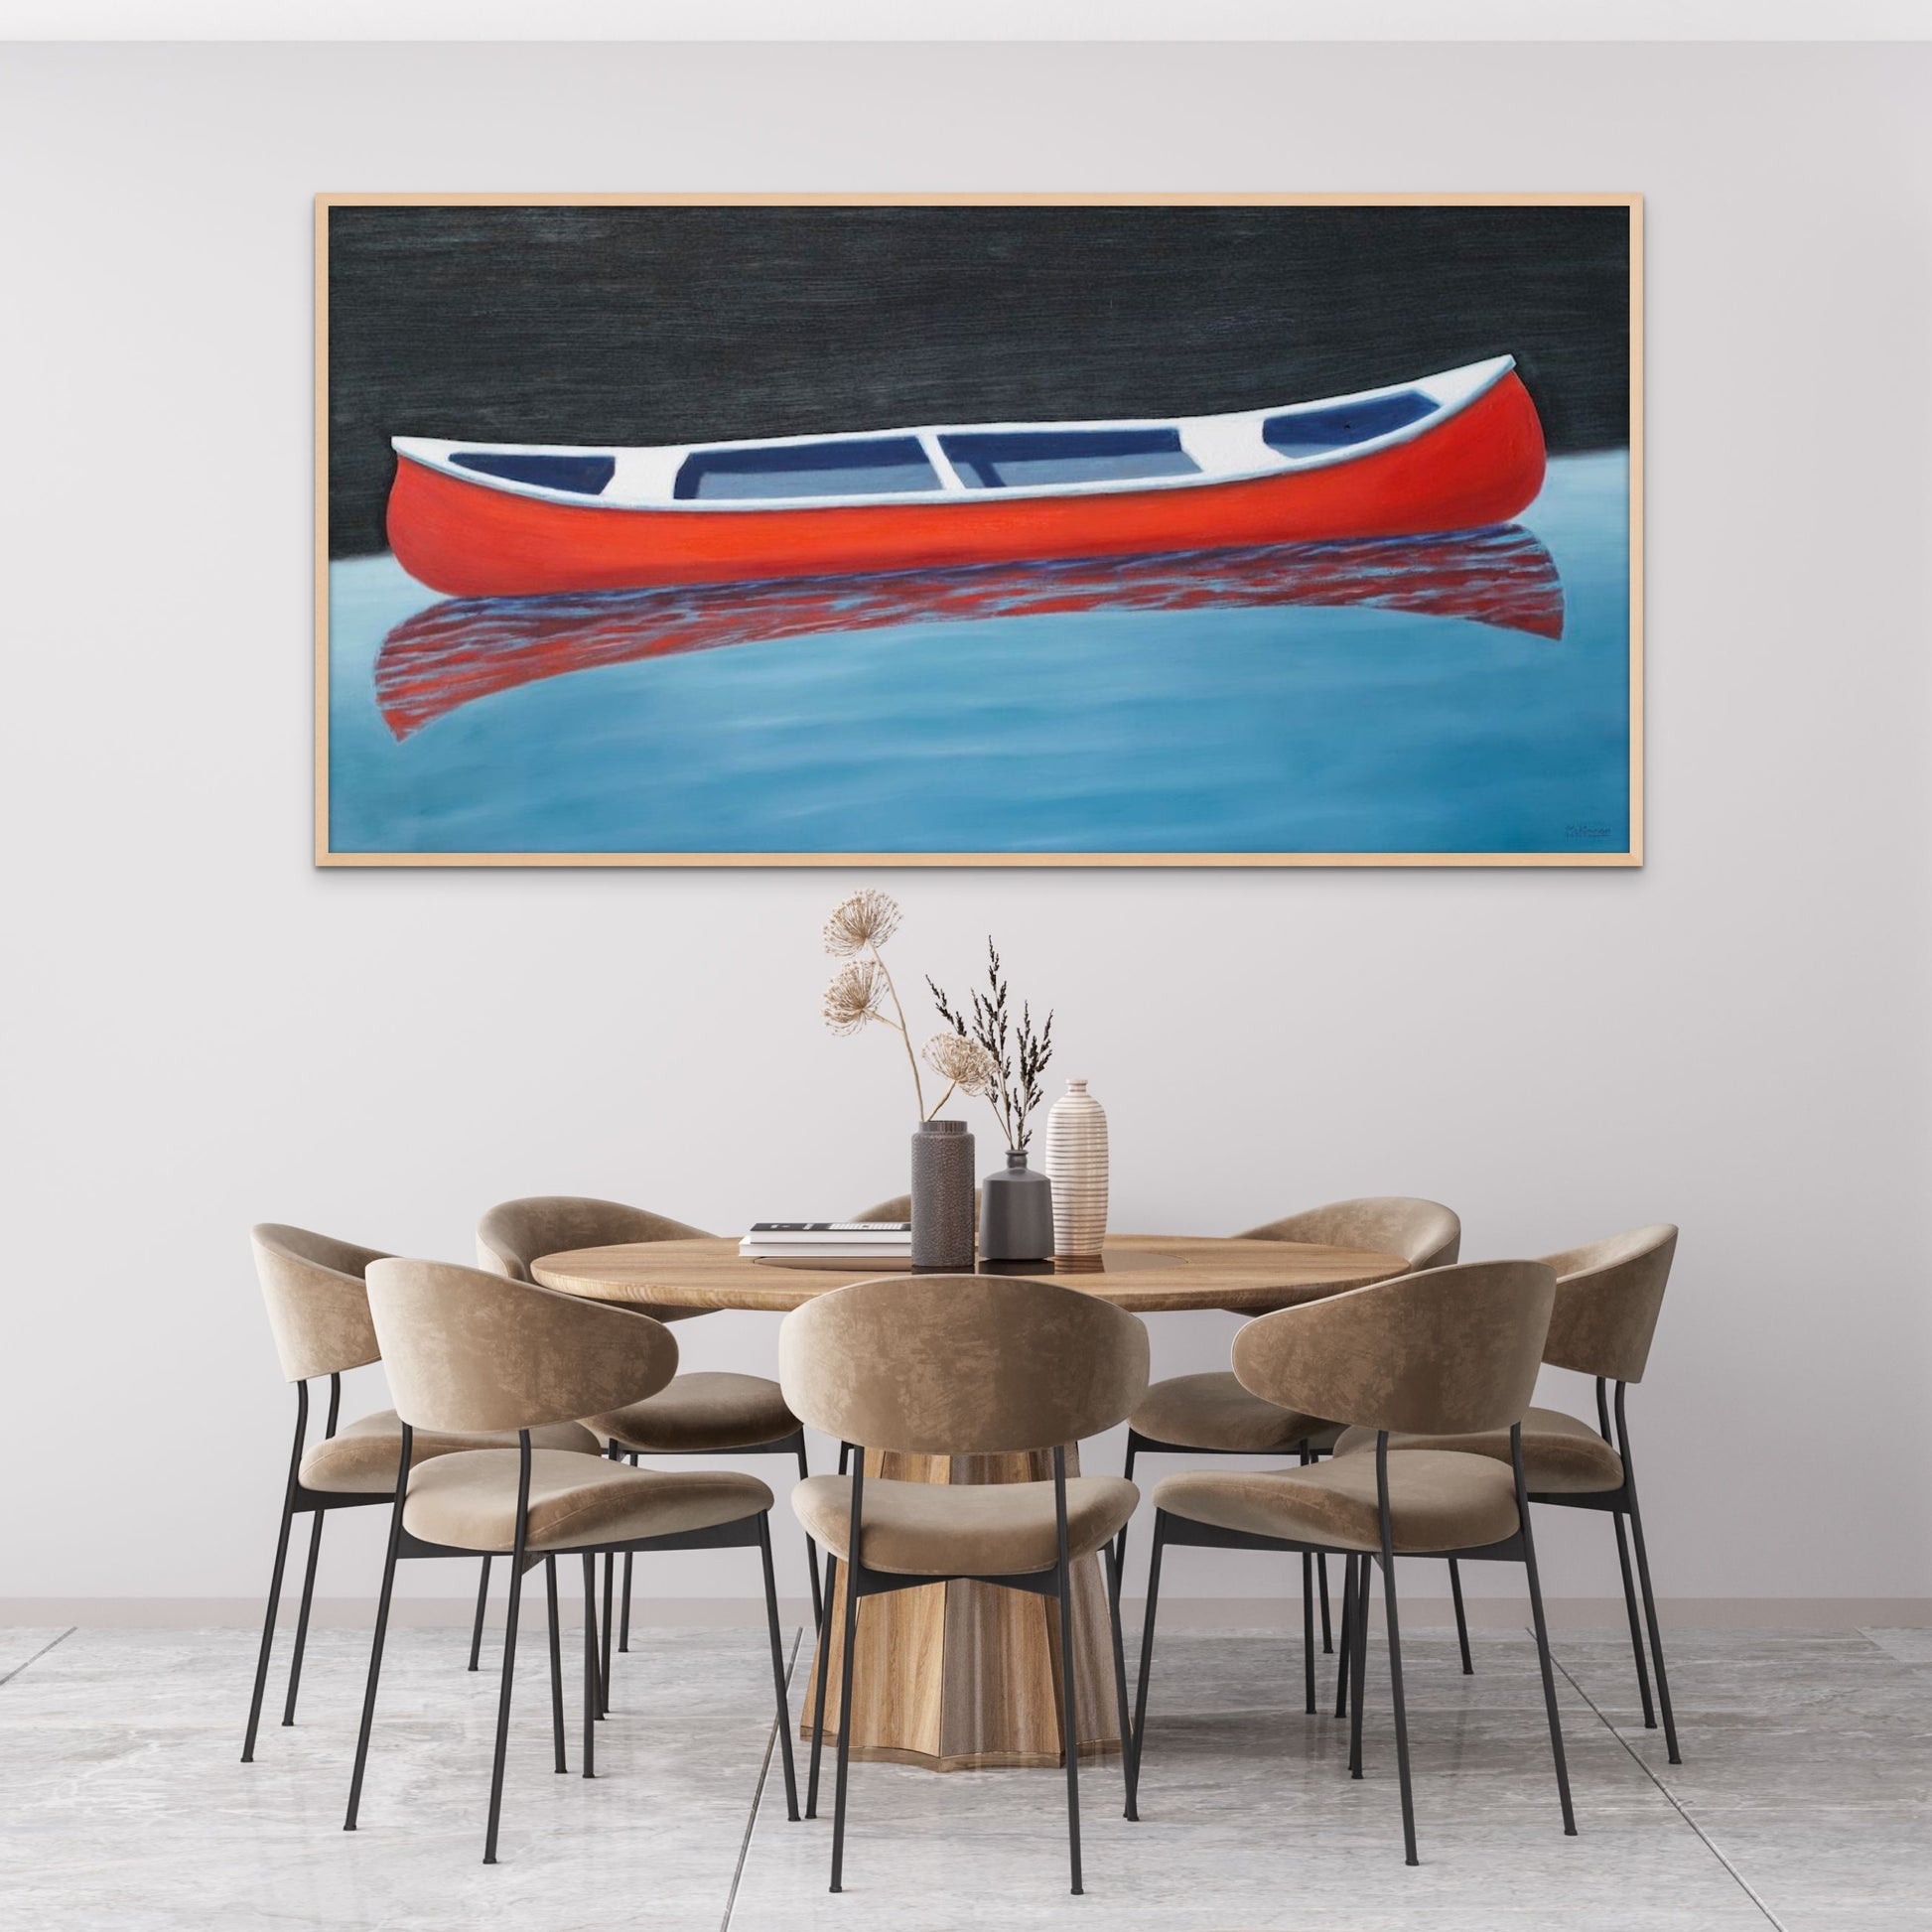 A painting of a red canoe by Canadian artist Catherine McKinnon. The small red boat is floating on almost still blue water in the foreground and the background is pitch black. The giclee print is framed in light colored wood. It is mounted on a light gray wall above a stylish, luxury, contemporary dining room table and seven chairs.